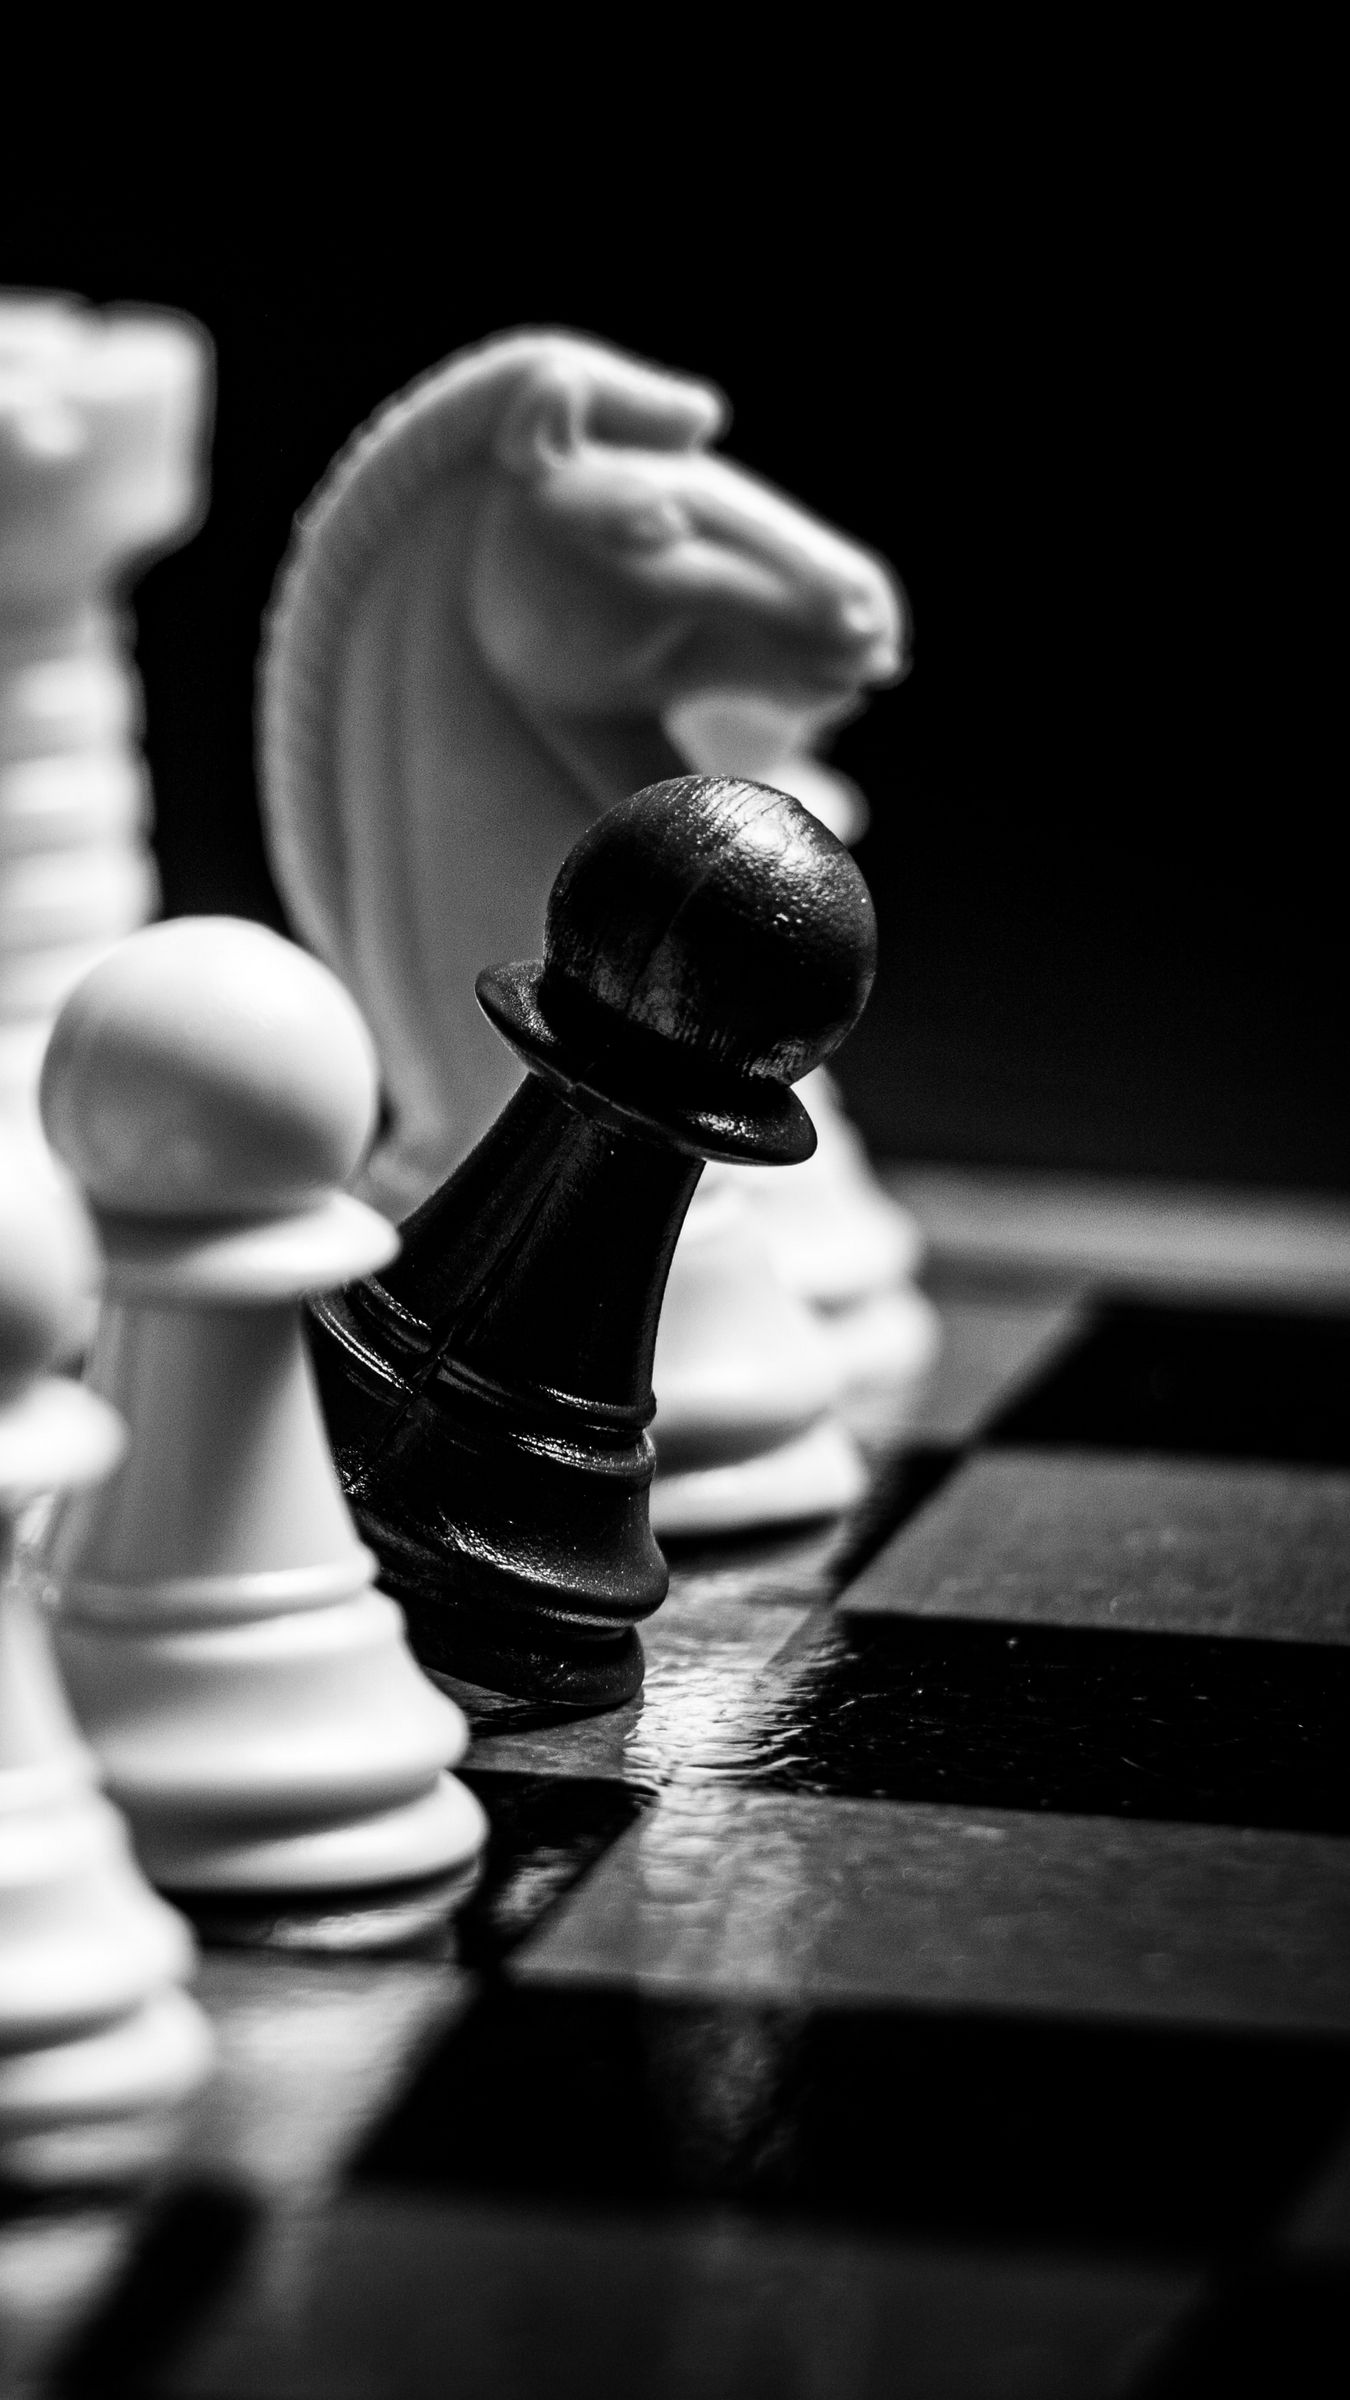 Chess for iphone HD wallpapers